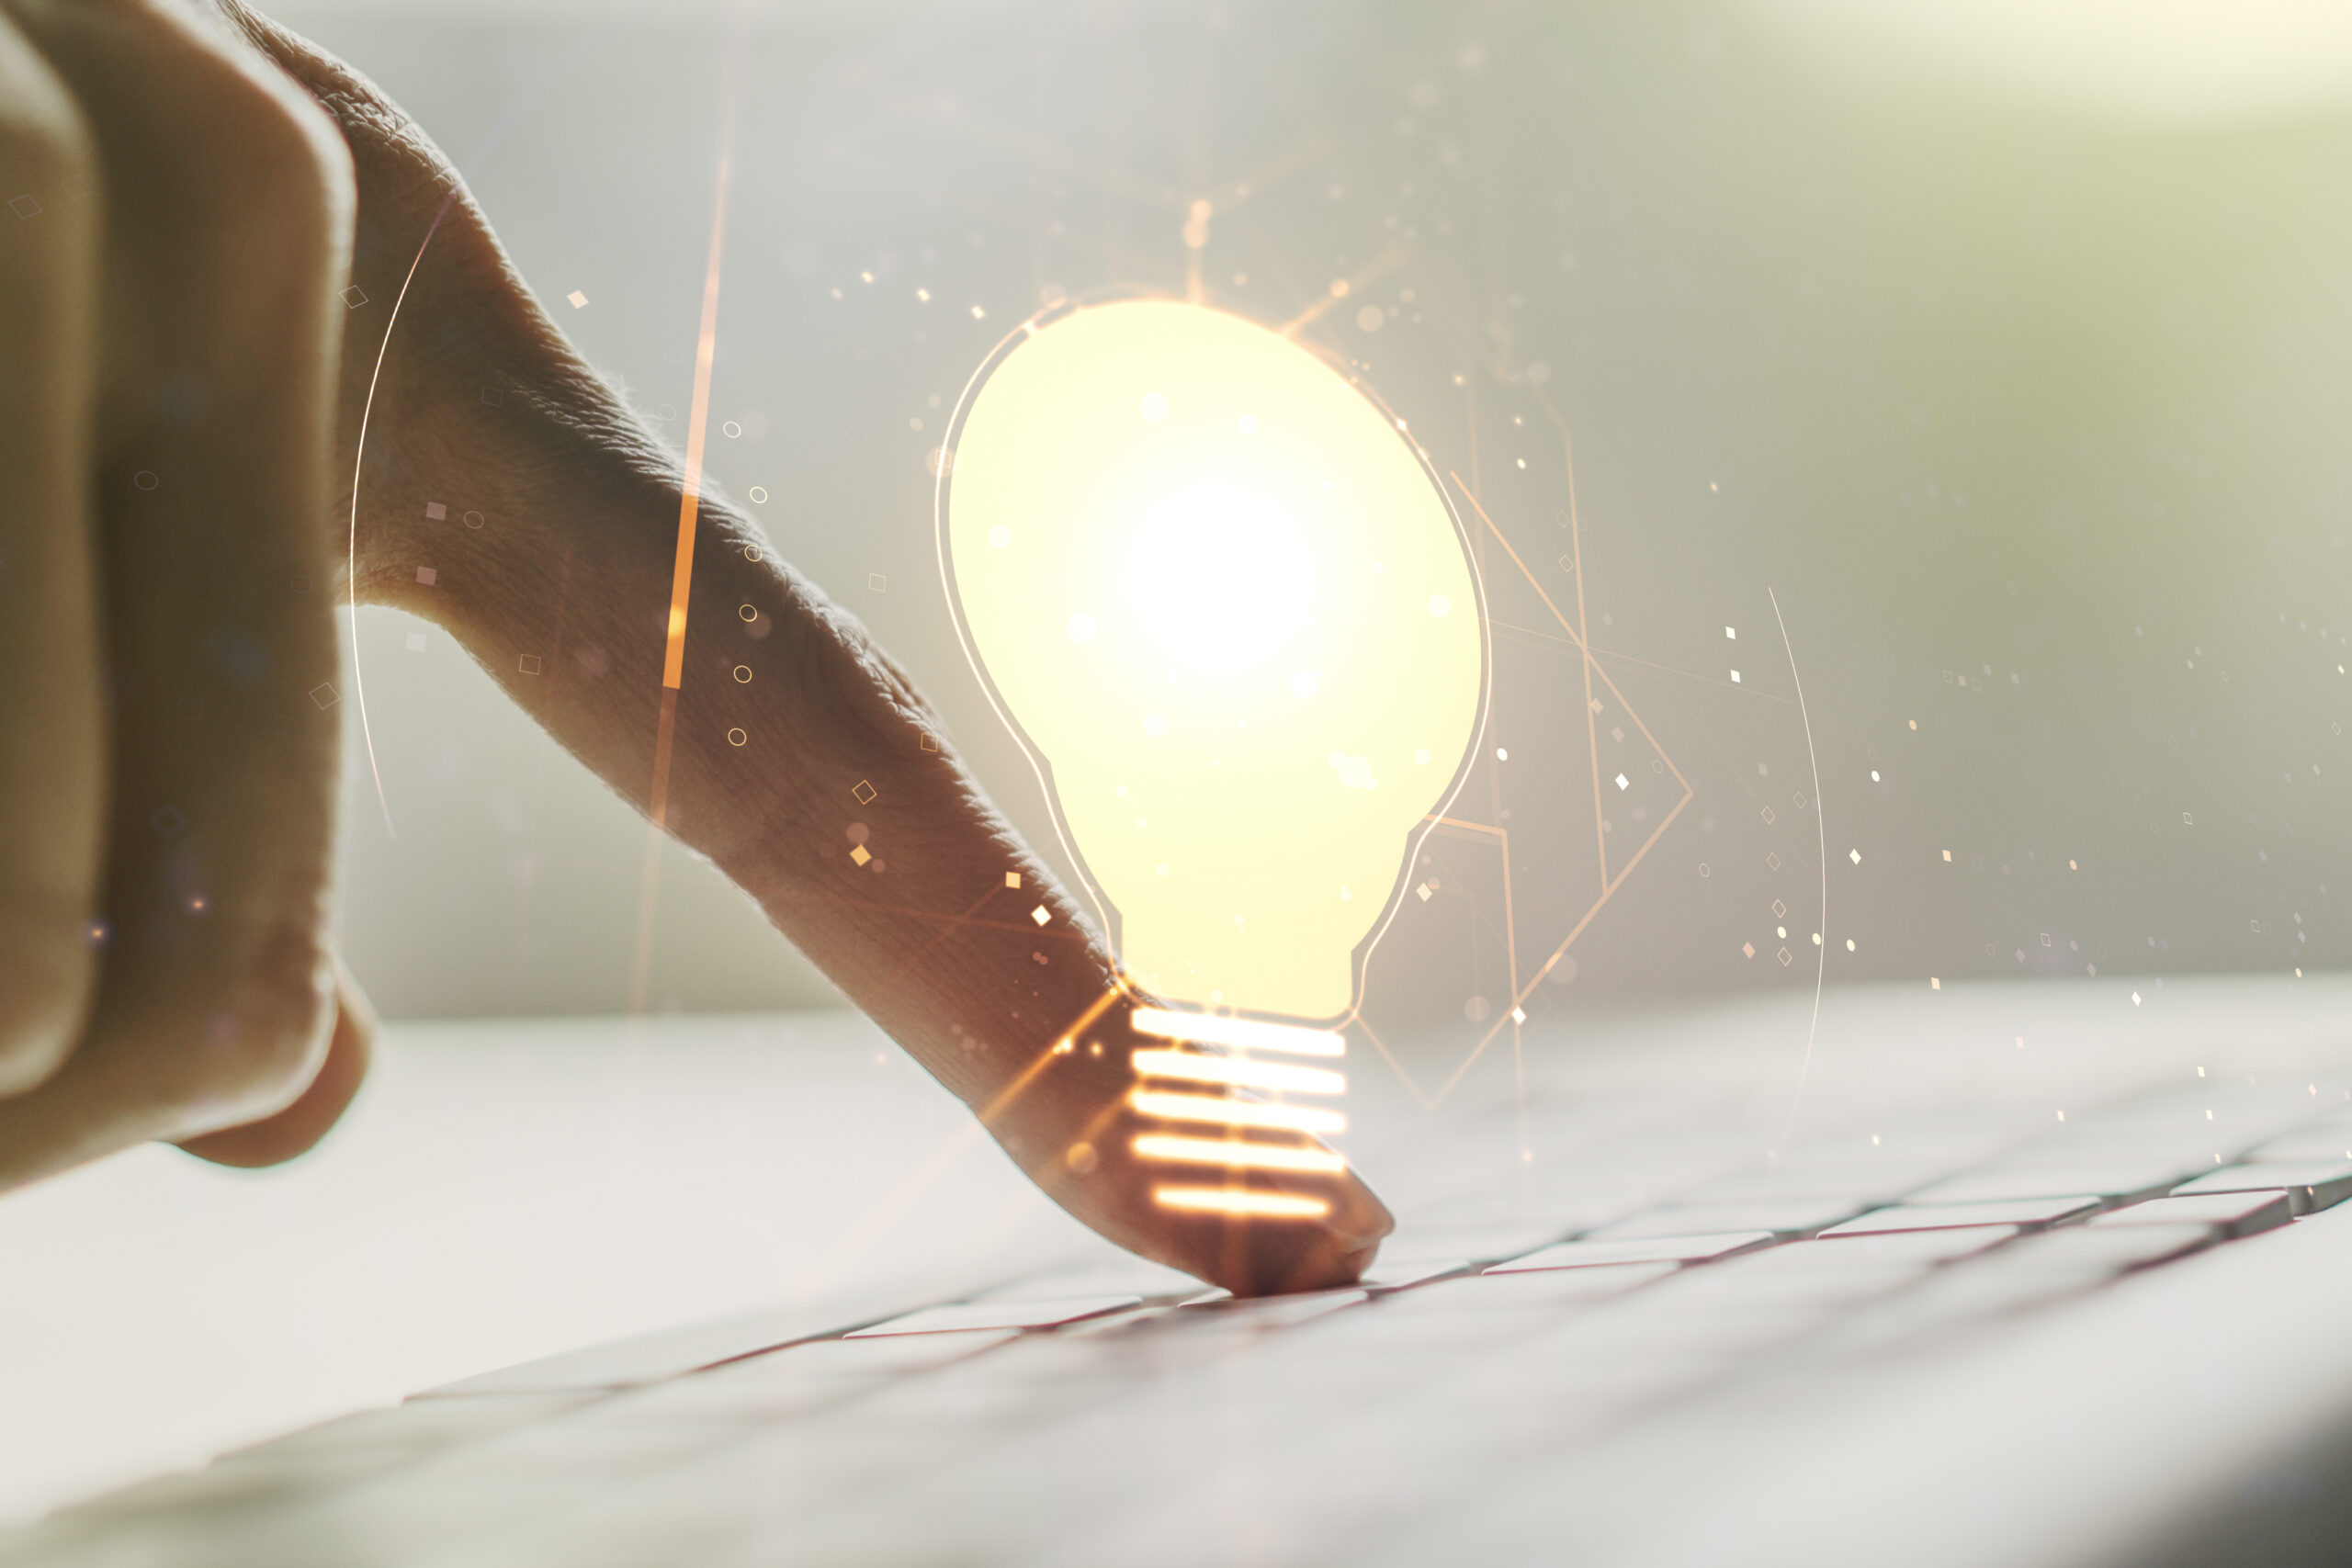 Creative light bulb illustration with hands typing on computer keyboard on background